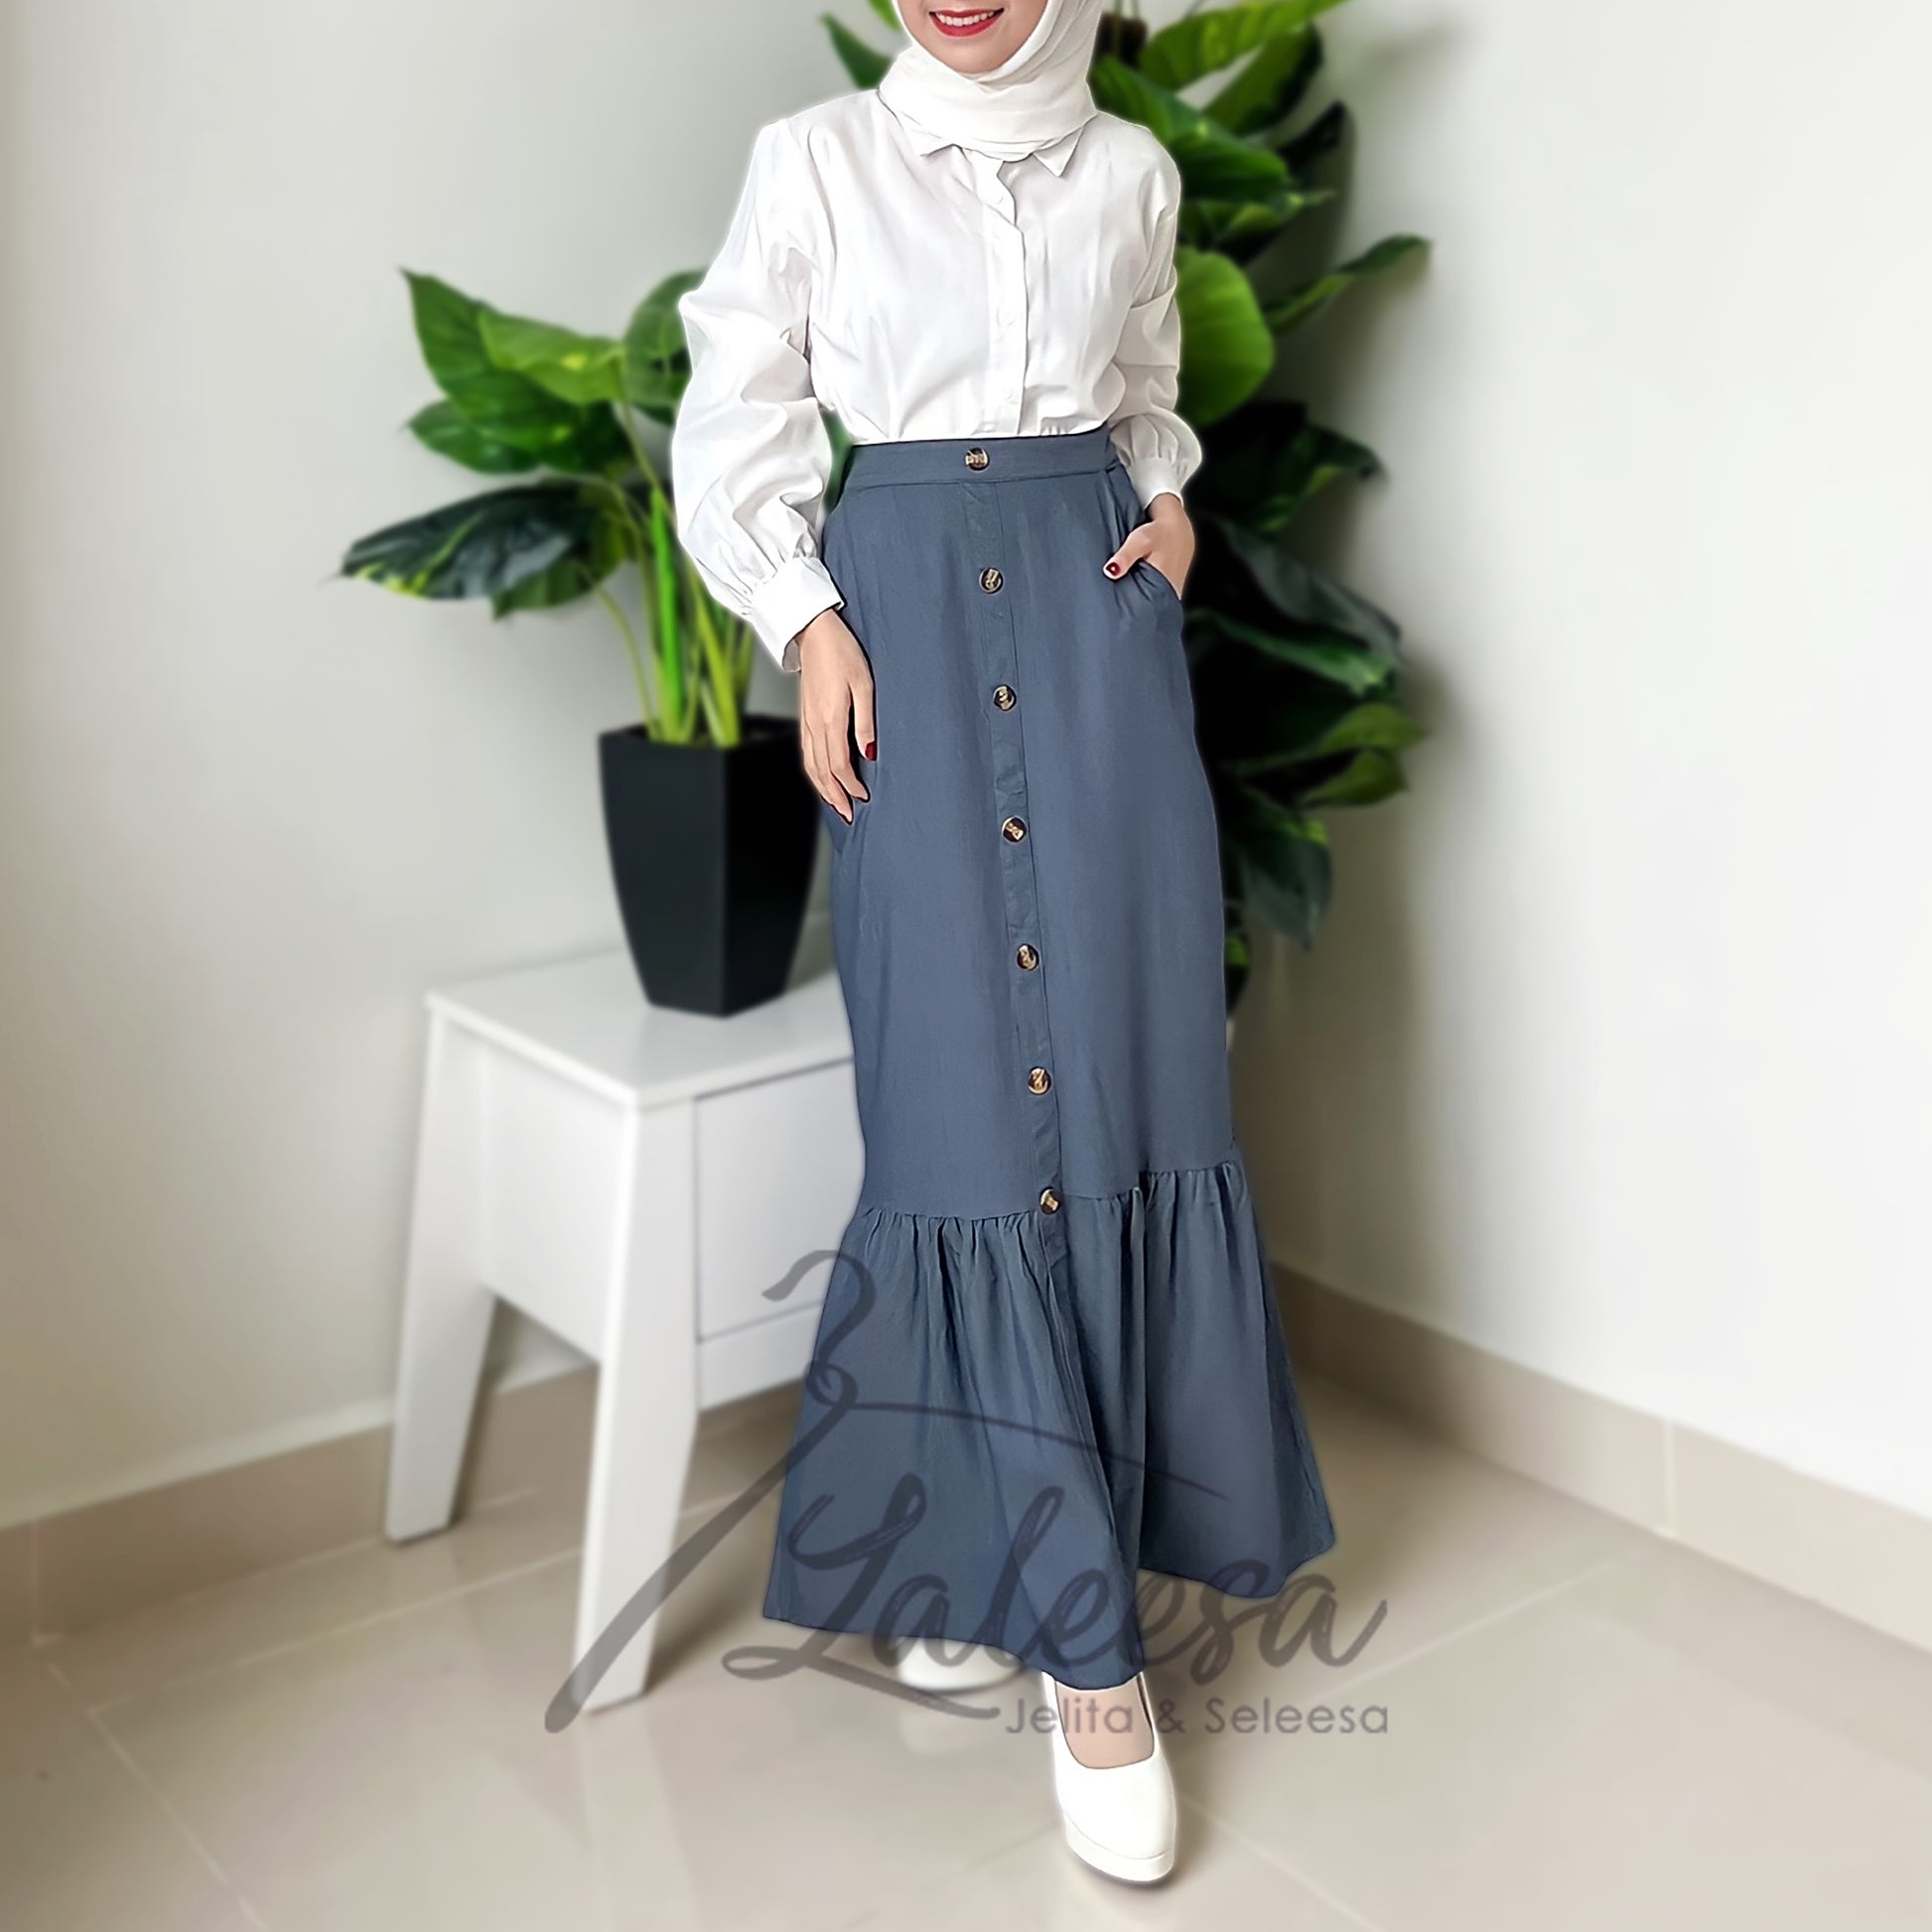 modest fashion flannel outfit baggy jeans | Flannel outfits, Muslim outfits  casual, Flannel shirt outfit